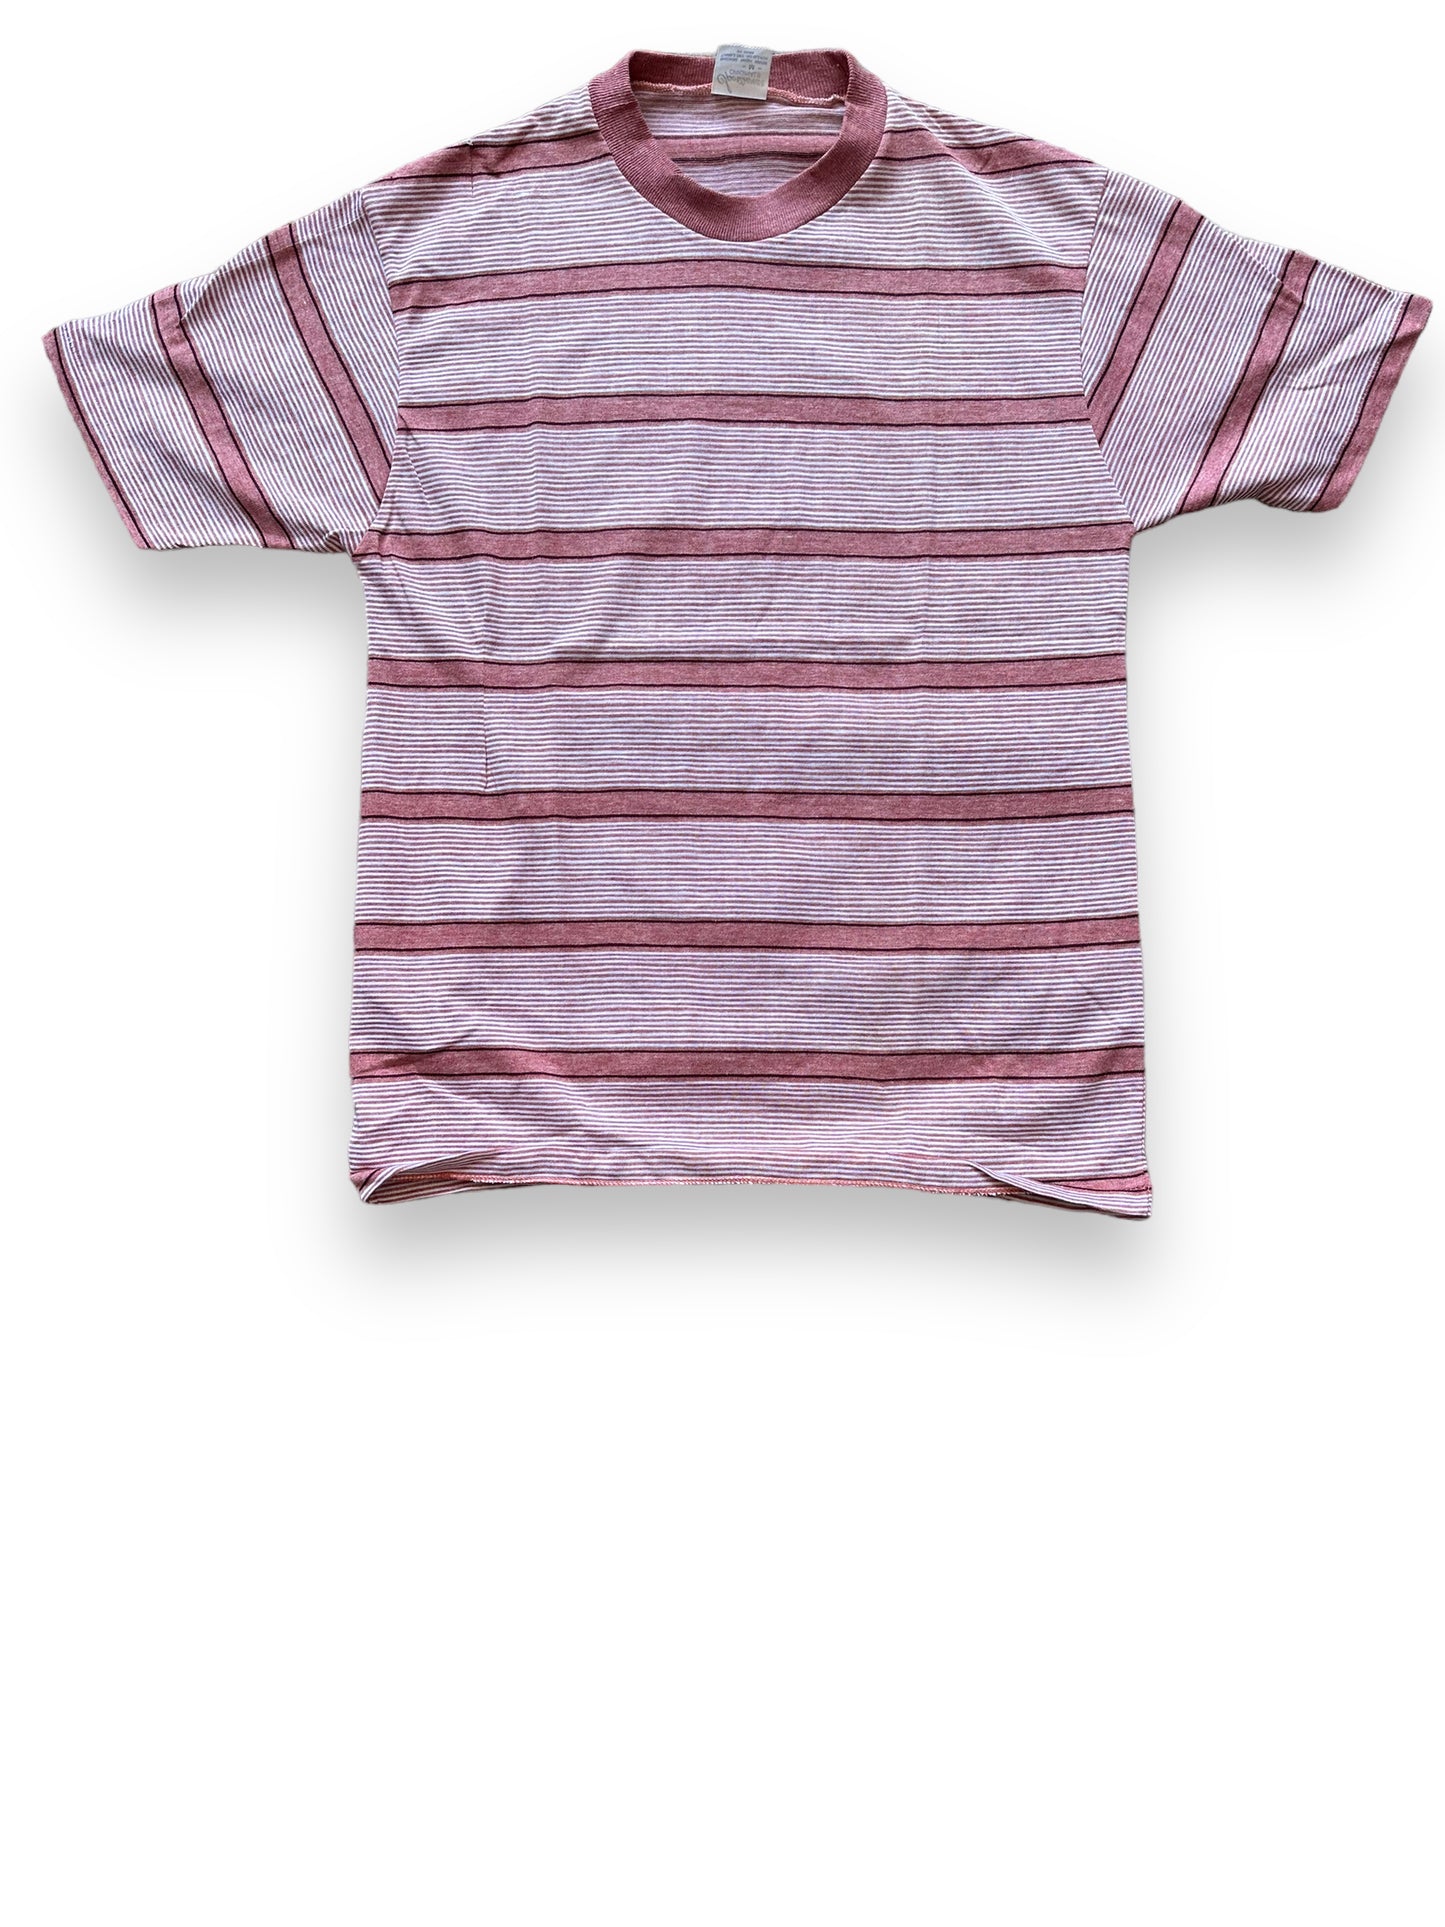 Front View of Vintage New Old Stock Sportswear Originals Striped Tee SZ M | Vintage Striped Shirts Seattle | Barn Owl Vintage Tees Seattle